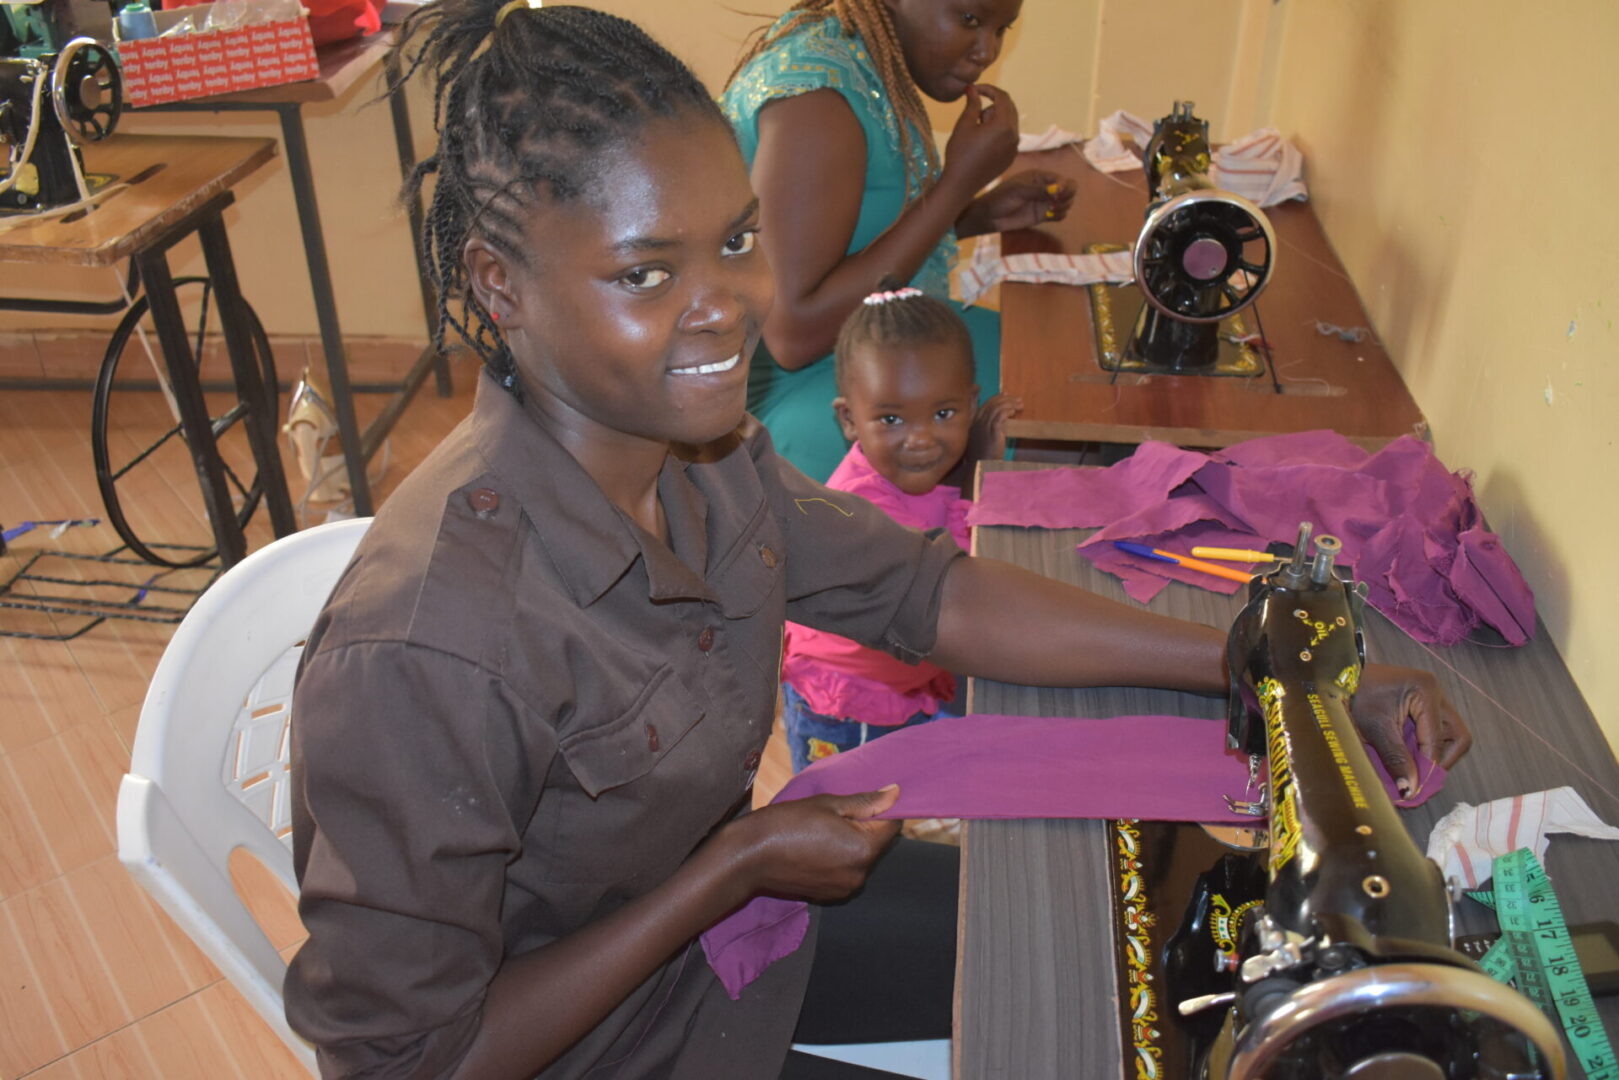 A woman smiles while sewing with her child.